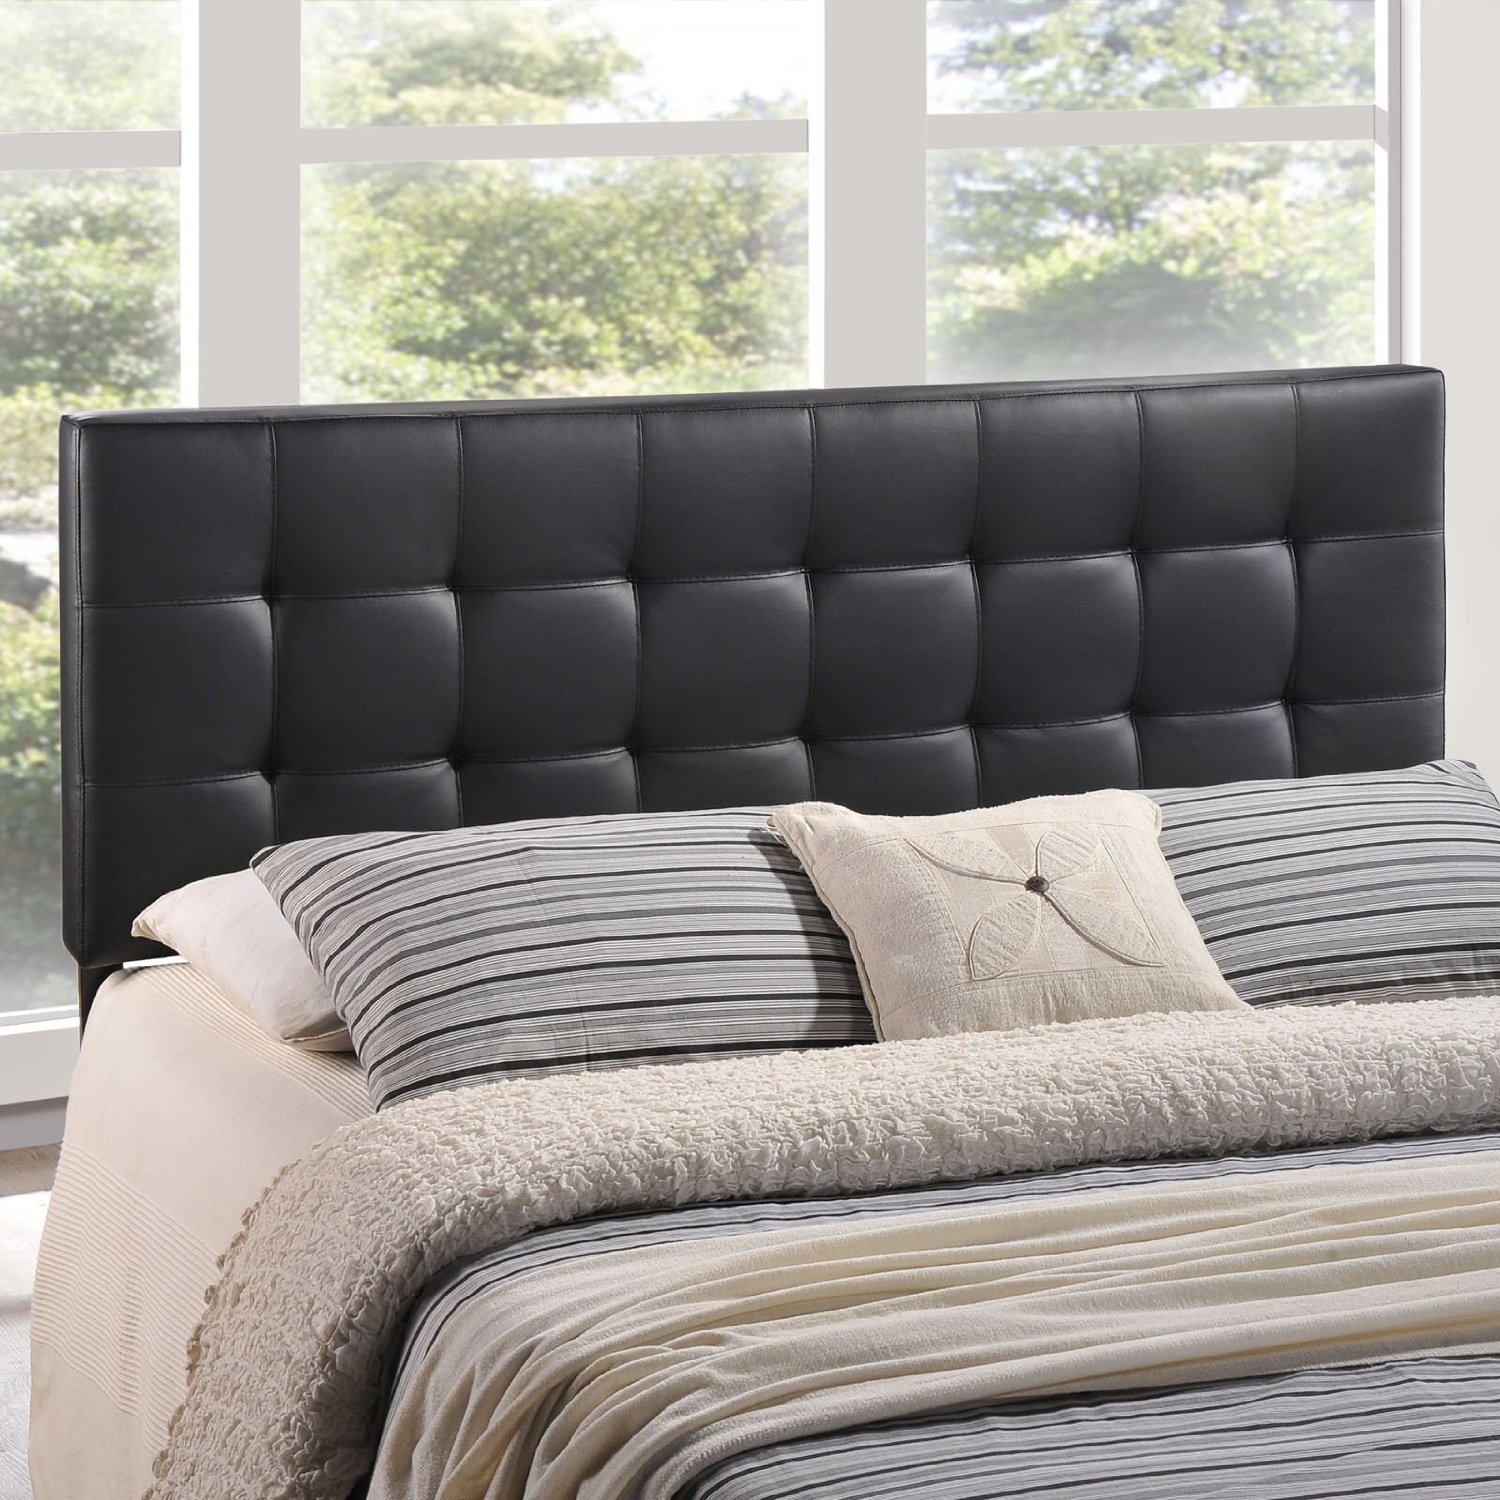 Top 97+ Pictures Images Of Upholstered Headboards Superb